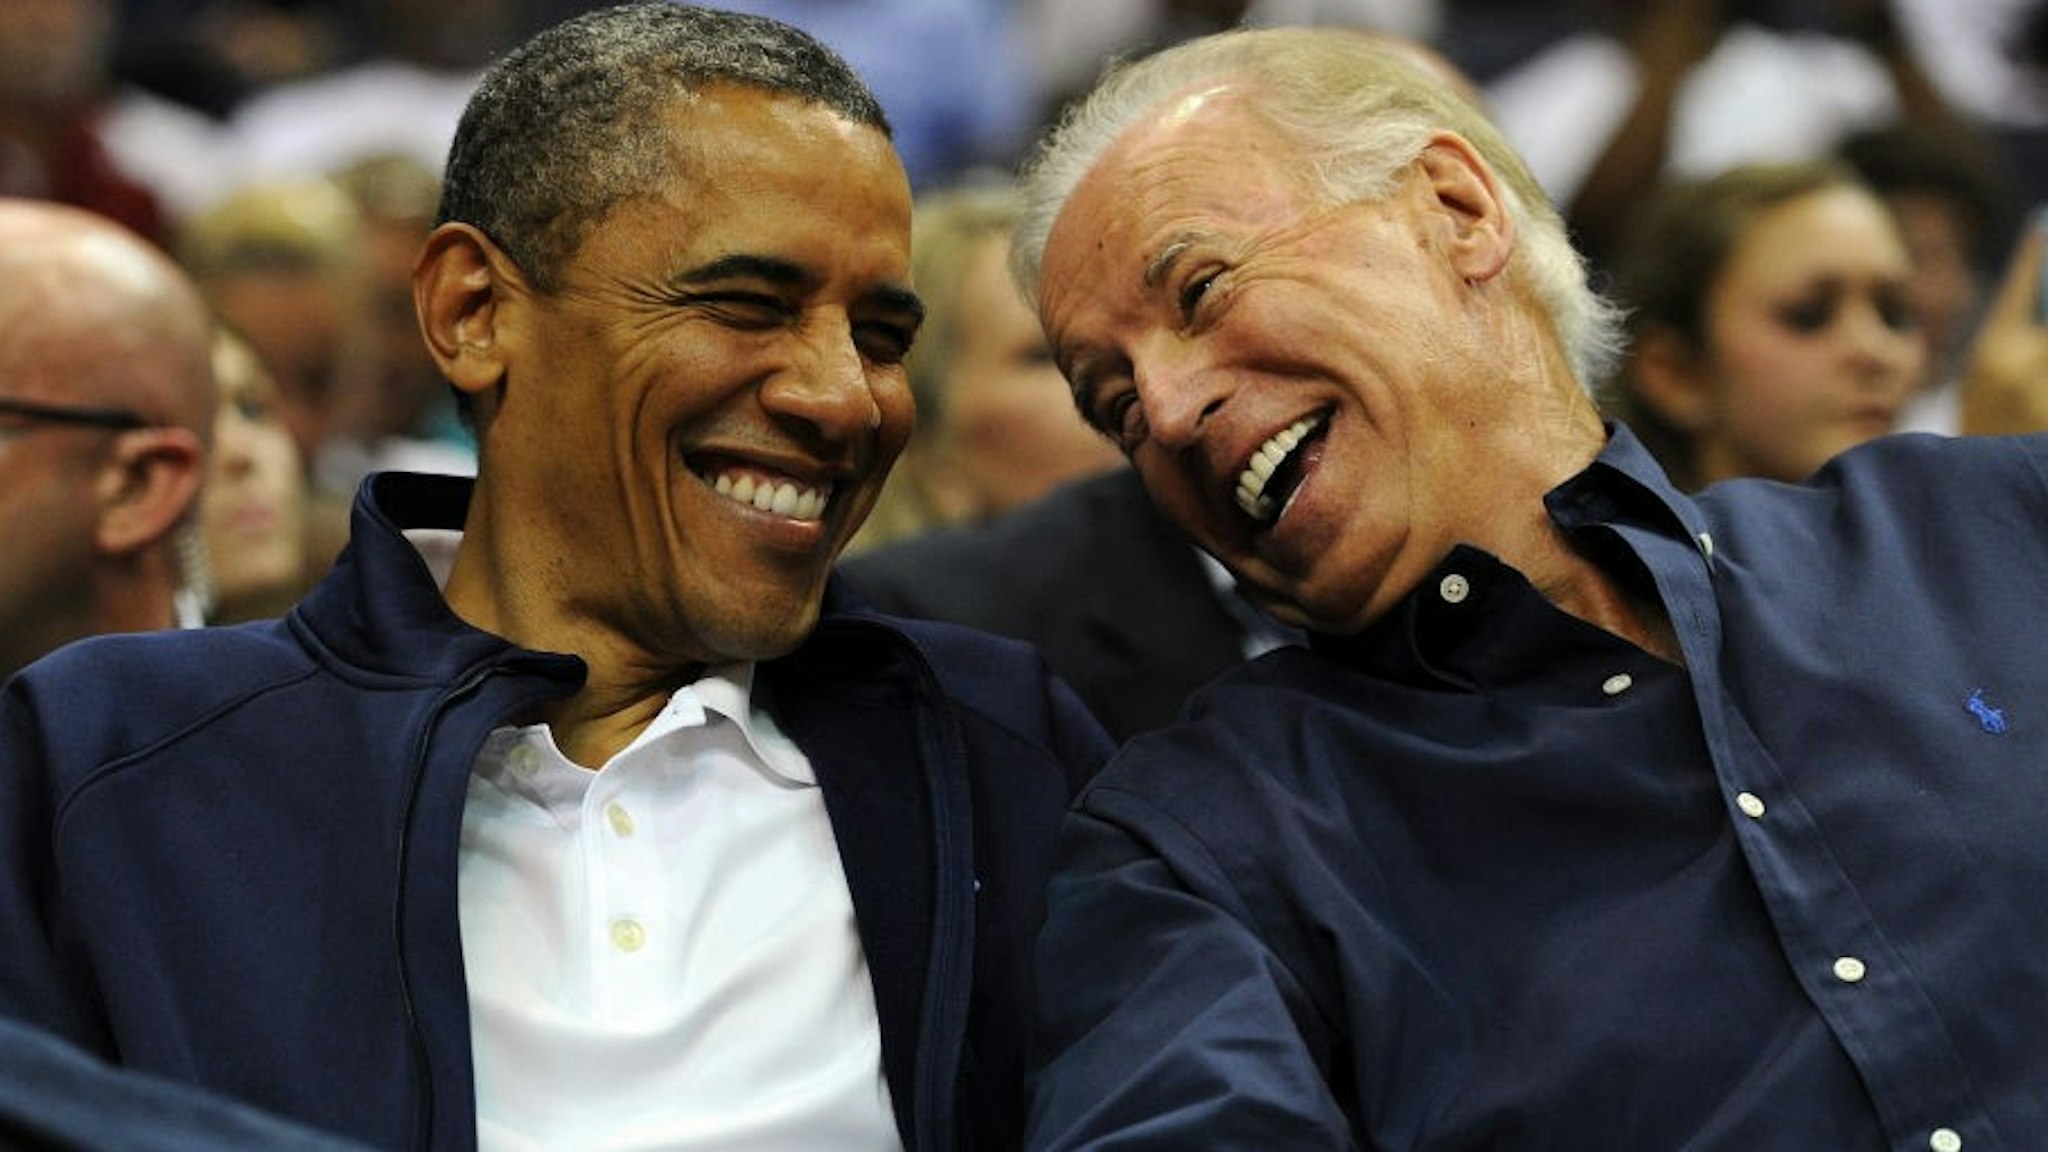 U.S. President Barack Obama and Vice President Joe Biden share a laugh as the US Senior Men's National Team and Brazil play during a pre-Olympic exhibition basketball game at the Verizon Center on July 16, 2012 in Washington, DC.